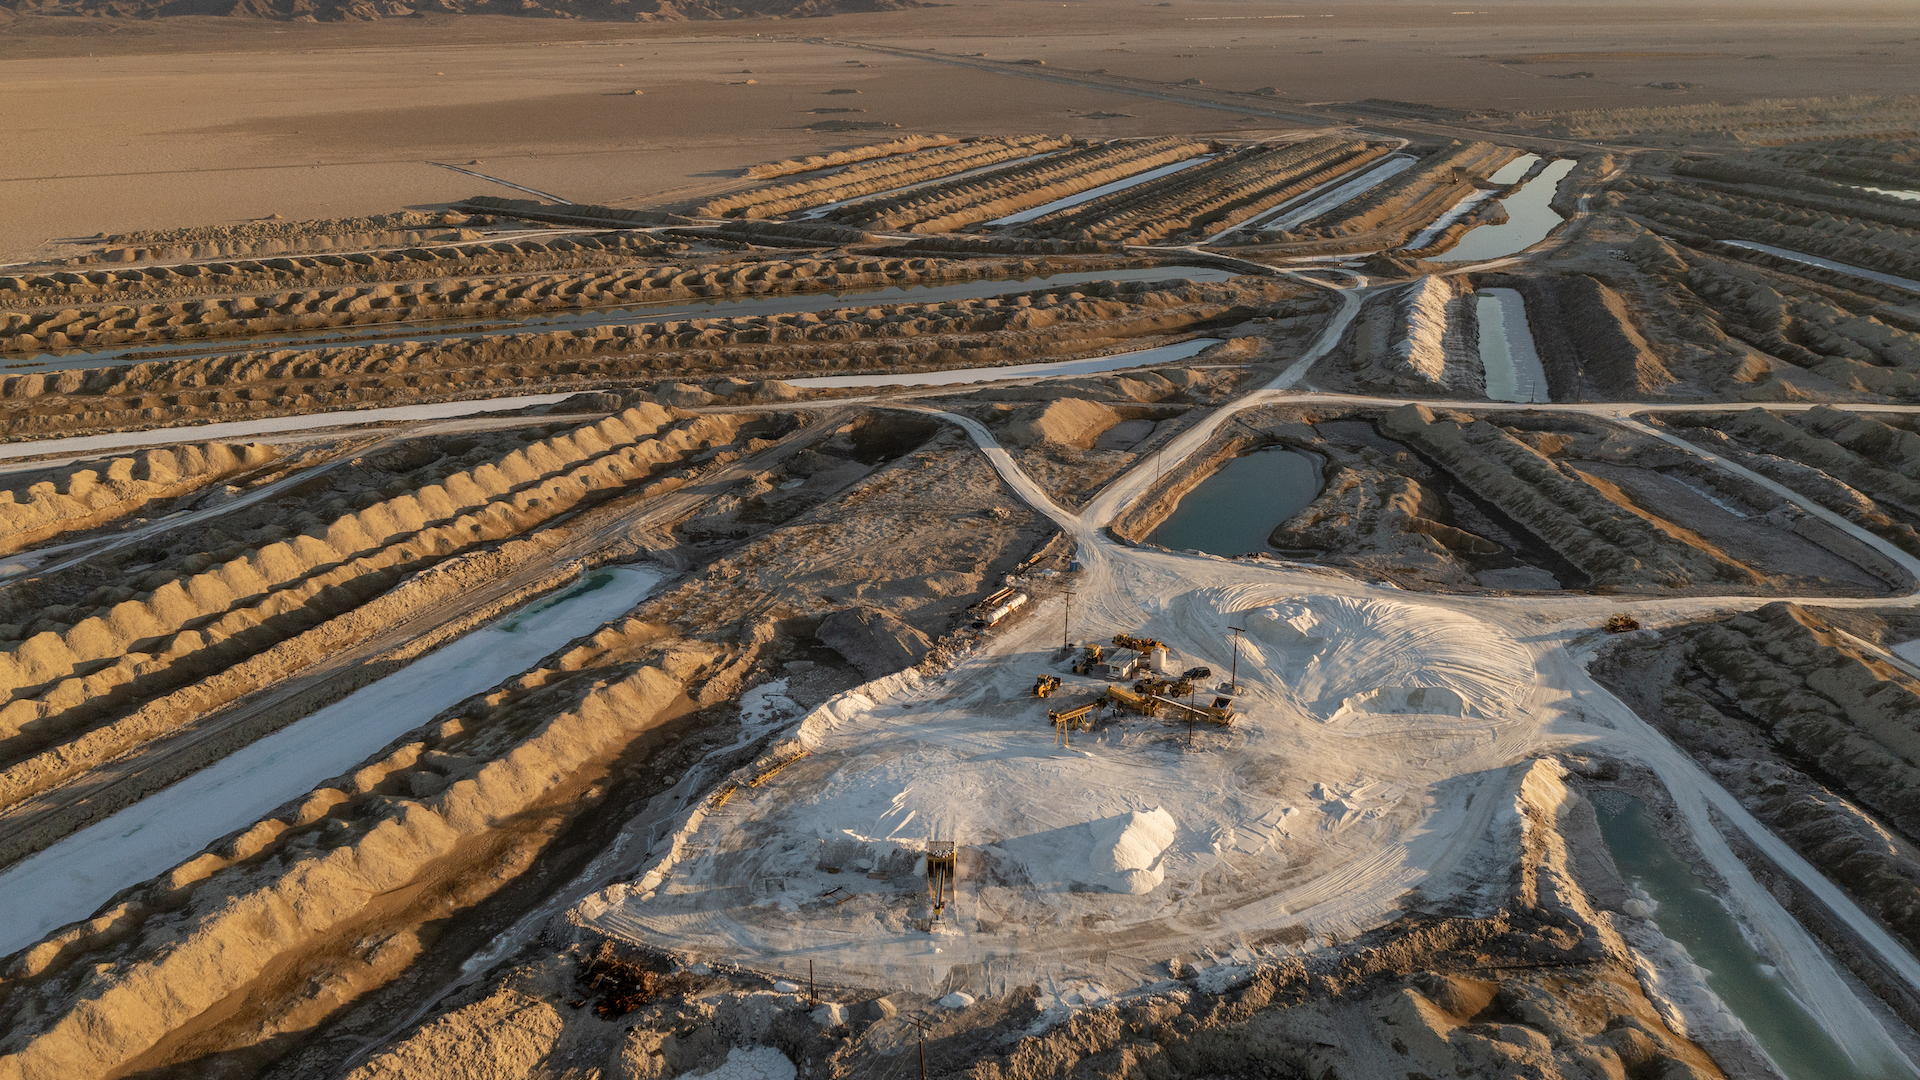 Aerial view of lithium mines in dry salt lake beds in California